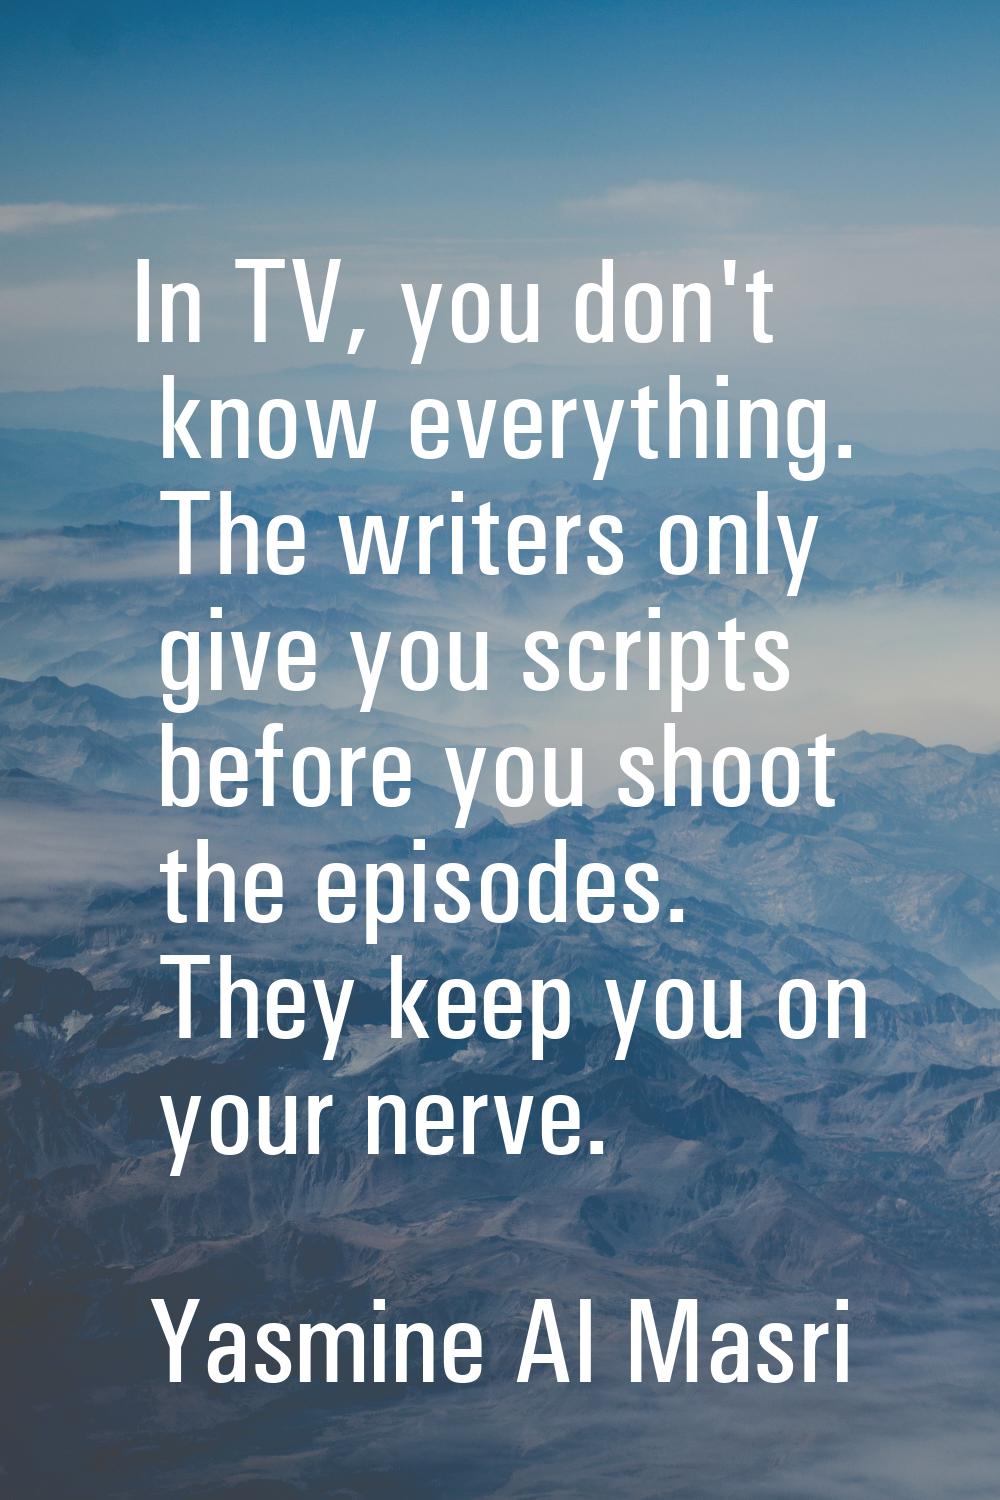 In TV, you don't know everything. The writers only give you scripts before you shoot the episodes. 